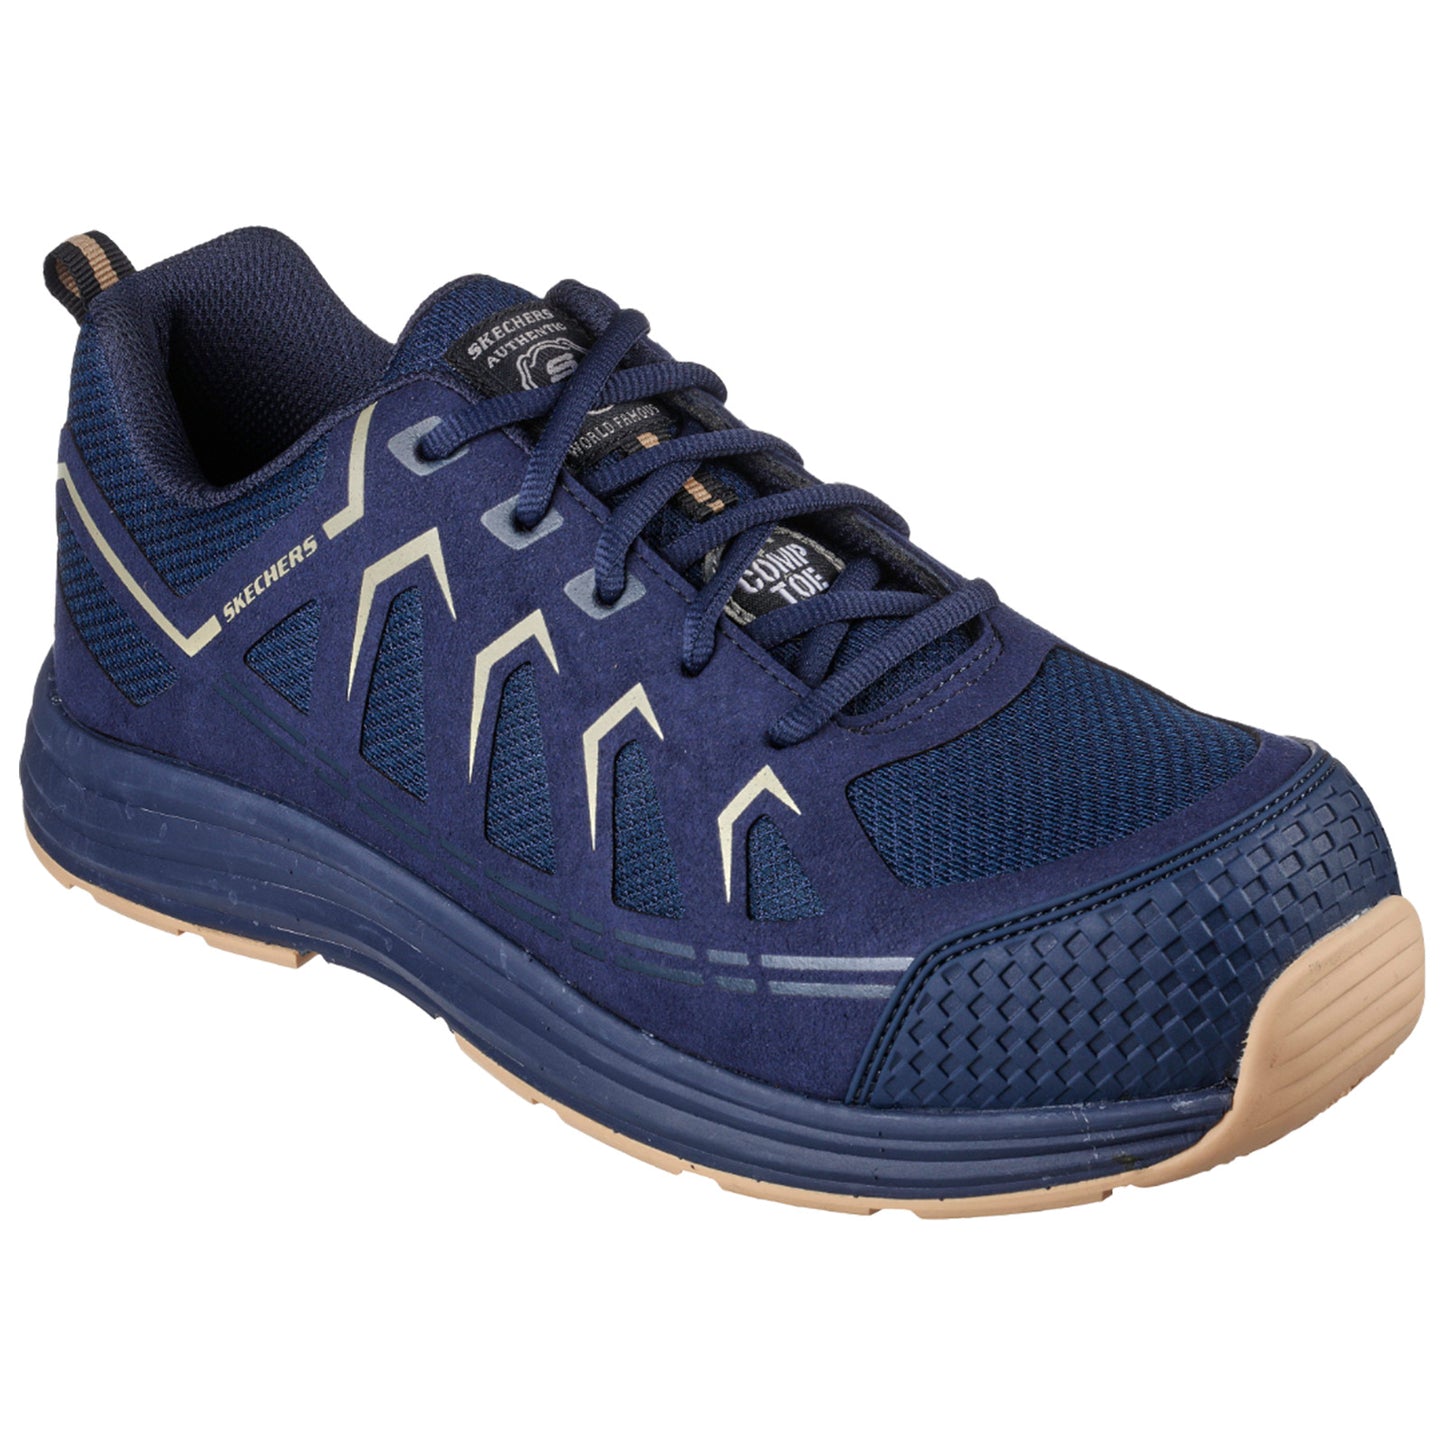 Skechers Mens Malad II Composite Toe Safety Trainers